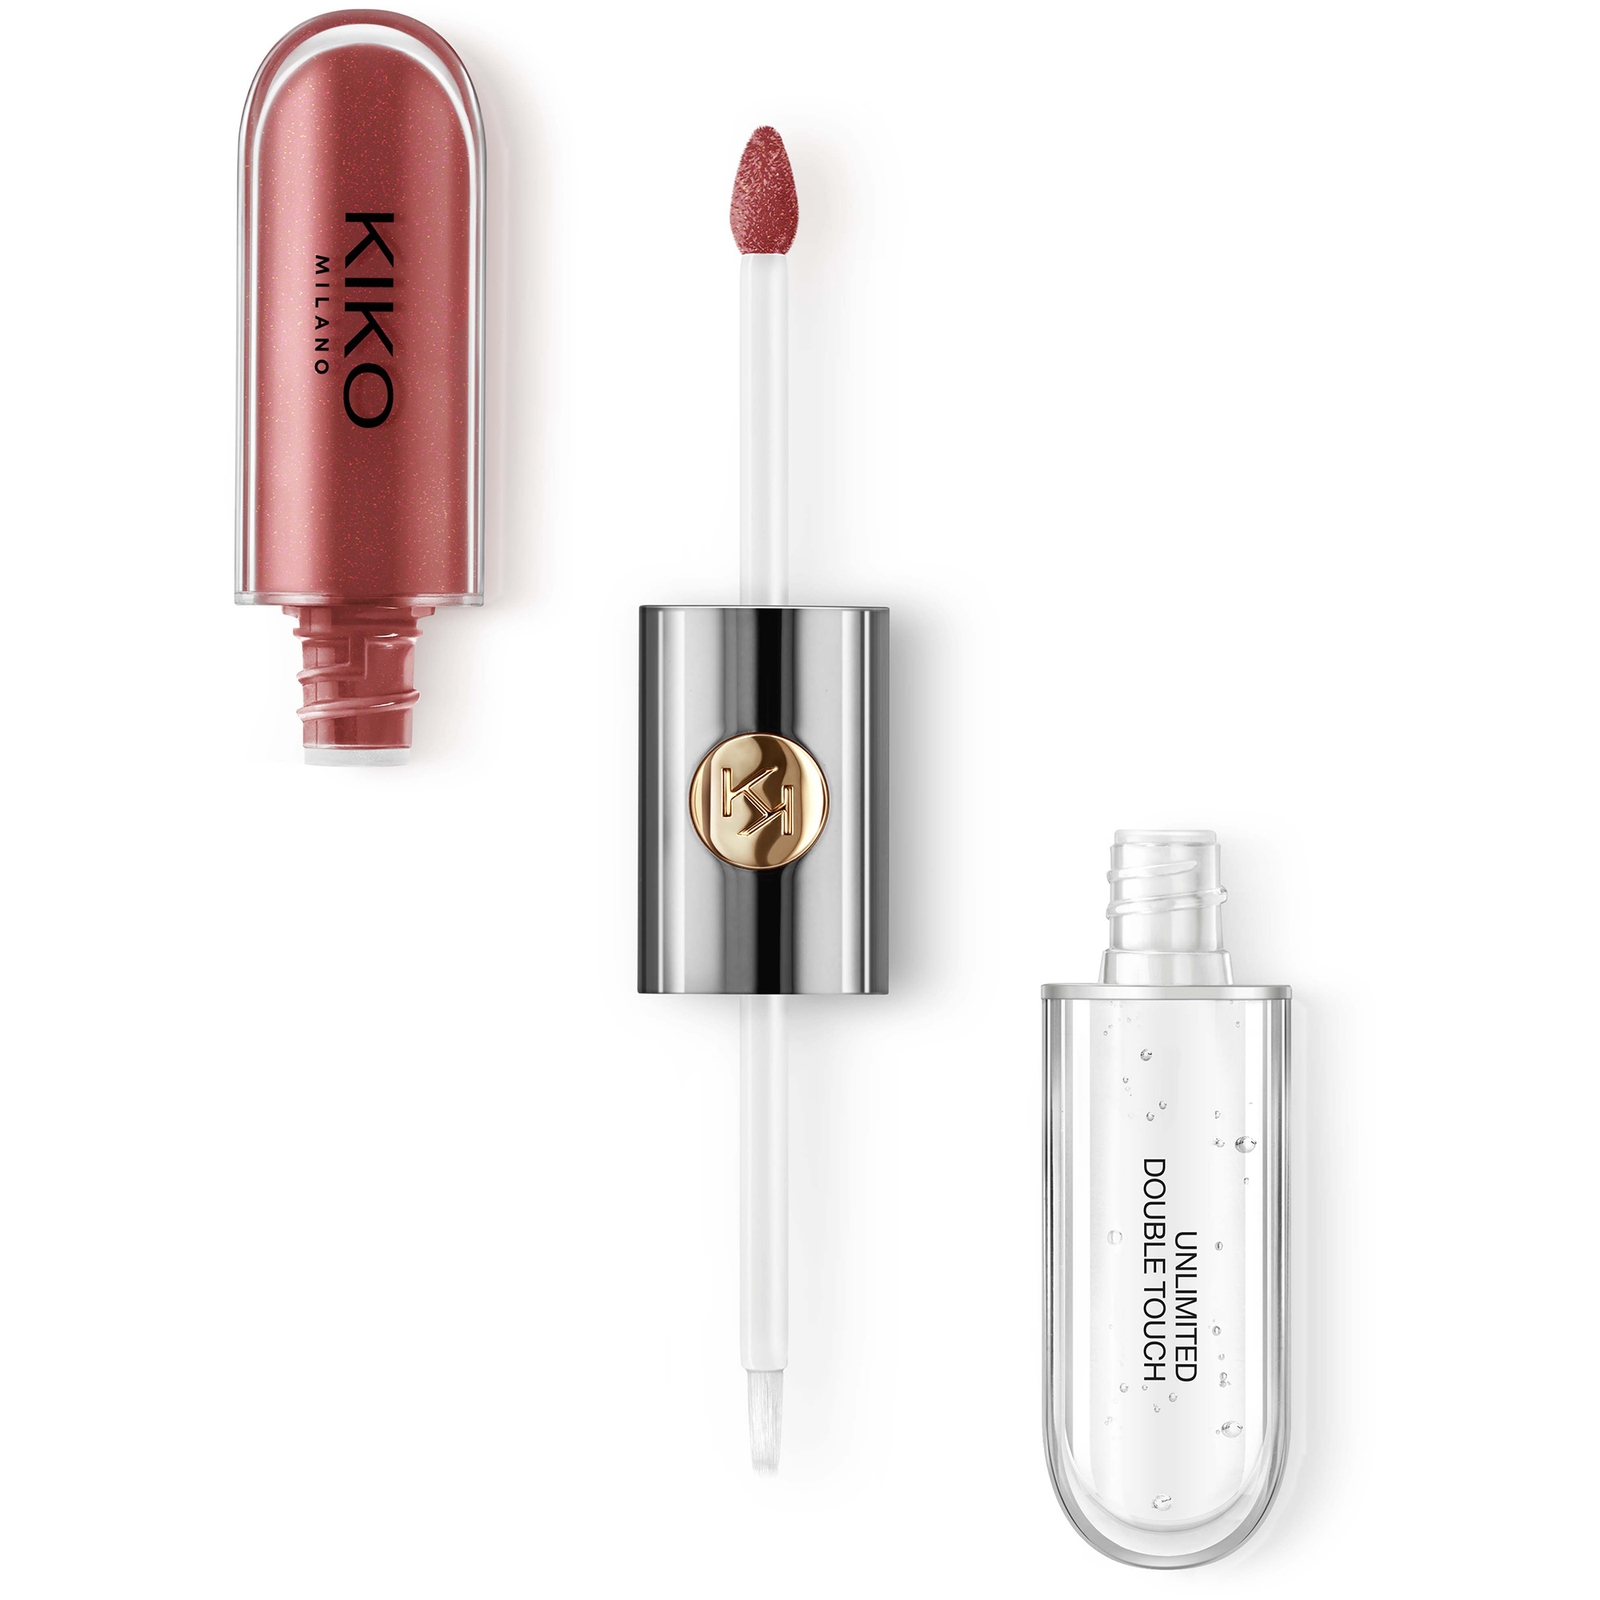 KIKO Milano Unlimited Double Touch 6ml (Various Shades) - 108 Satin Currant Red